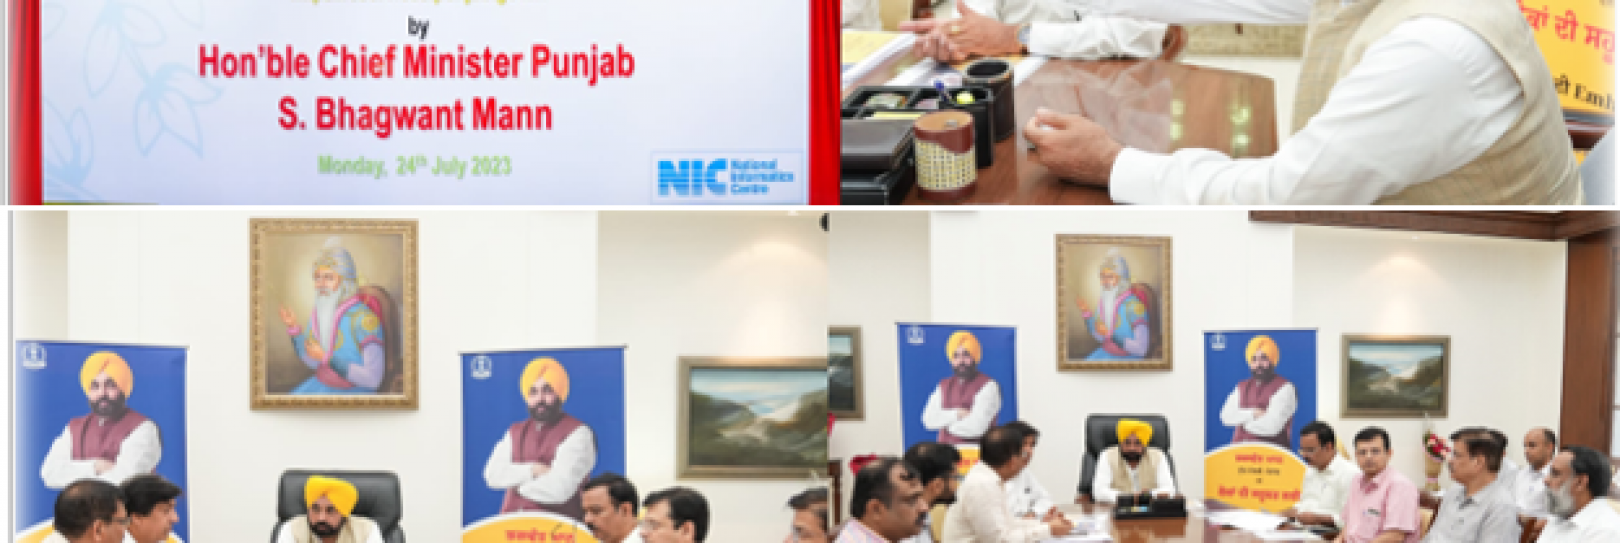 REVOLUTIONIZES PROPERTY TRANSACTIONS WITH “EMBOSSING OF DOCUMENTS” SERVICE FOR NRIS IN PUNJAB